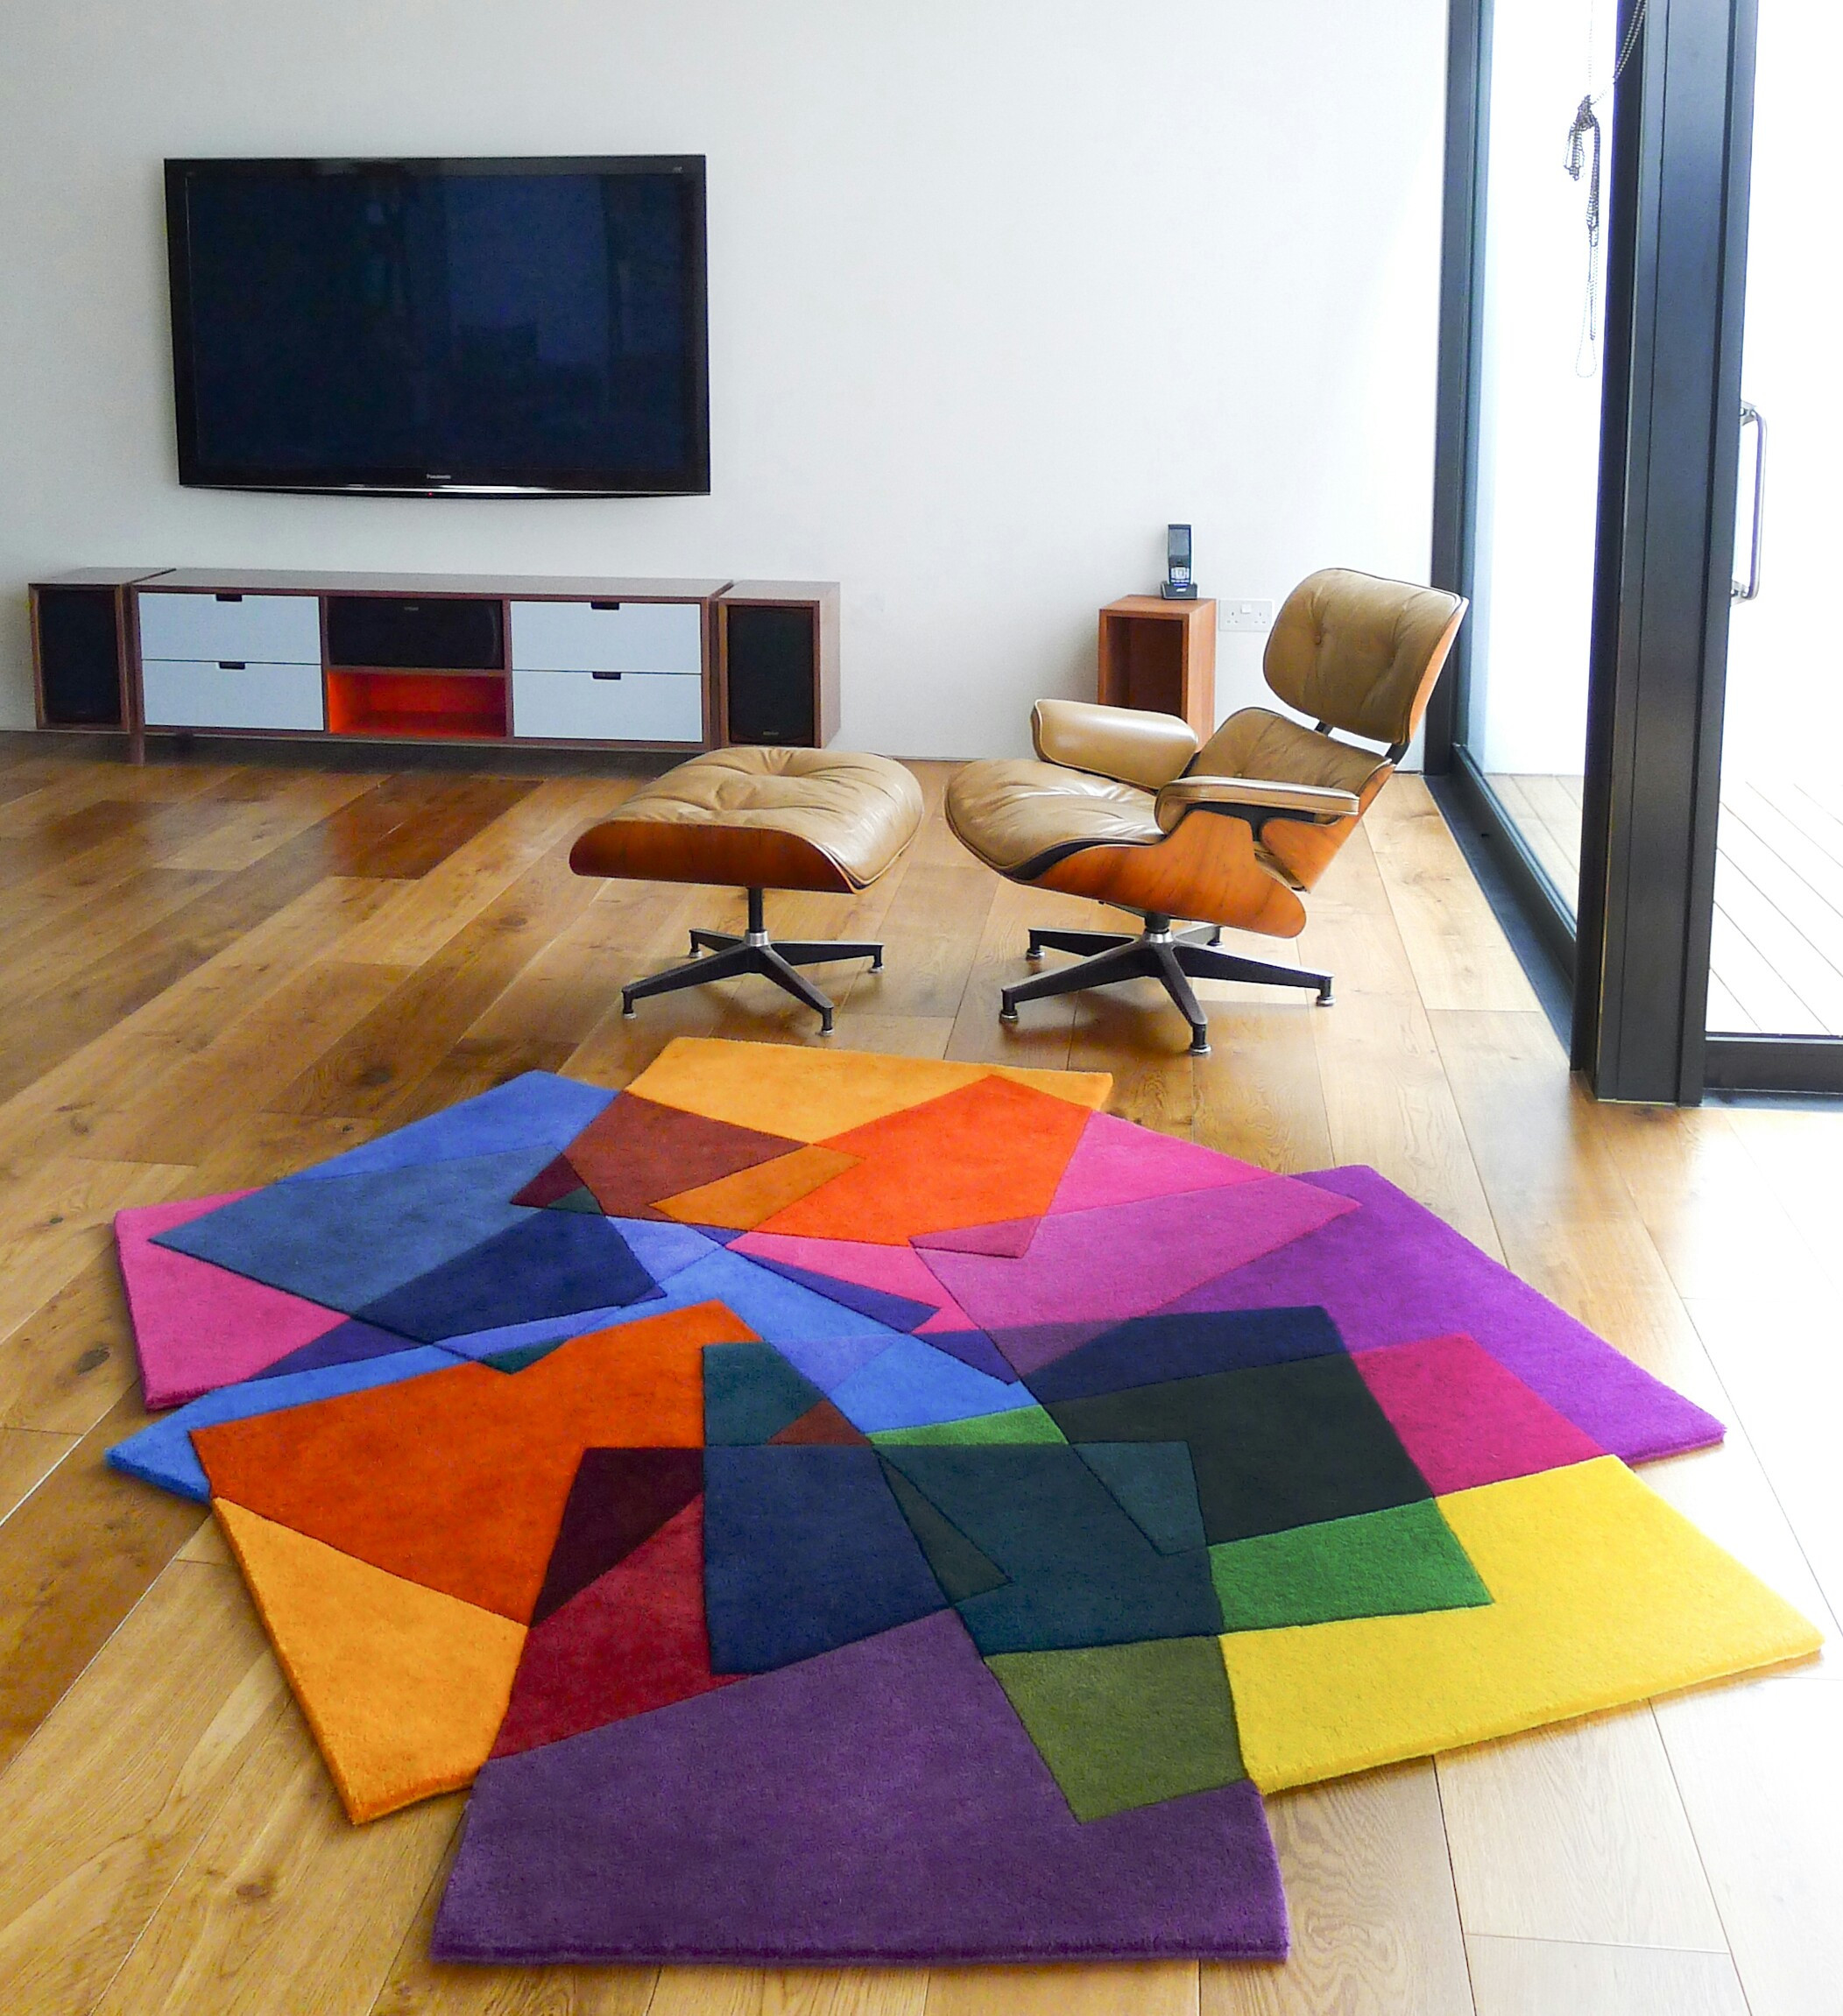 Unique Rugs For Living Room
 Festival of colors Happy Holi